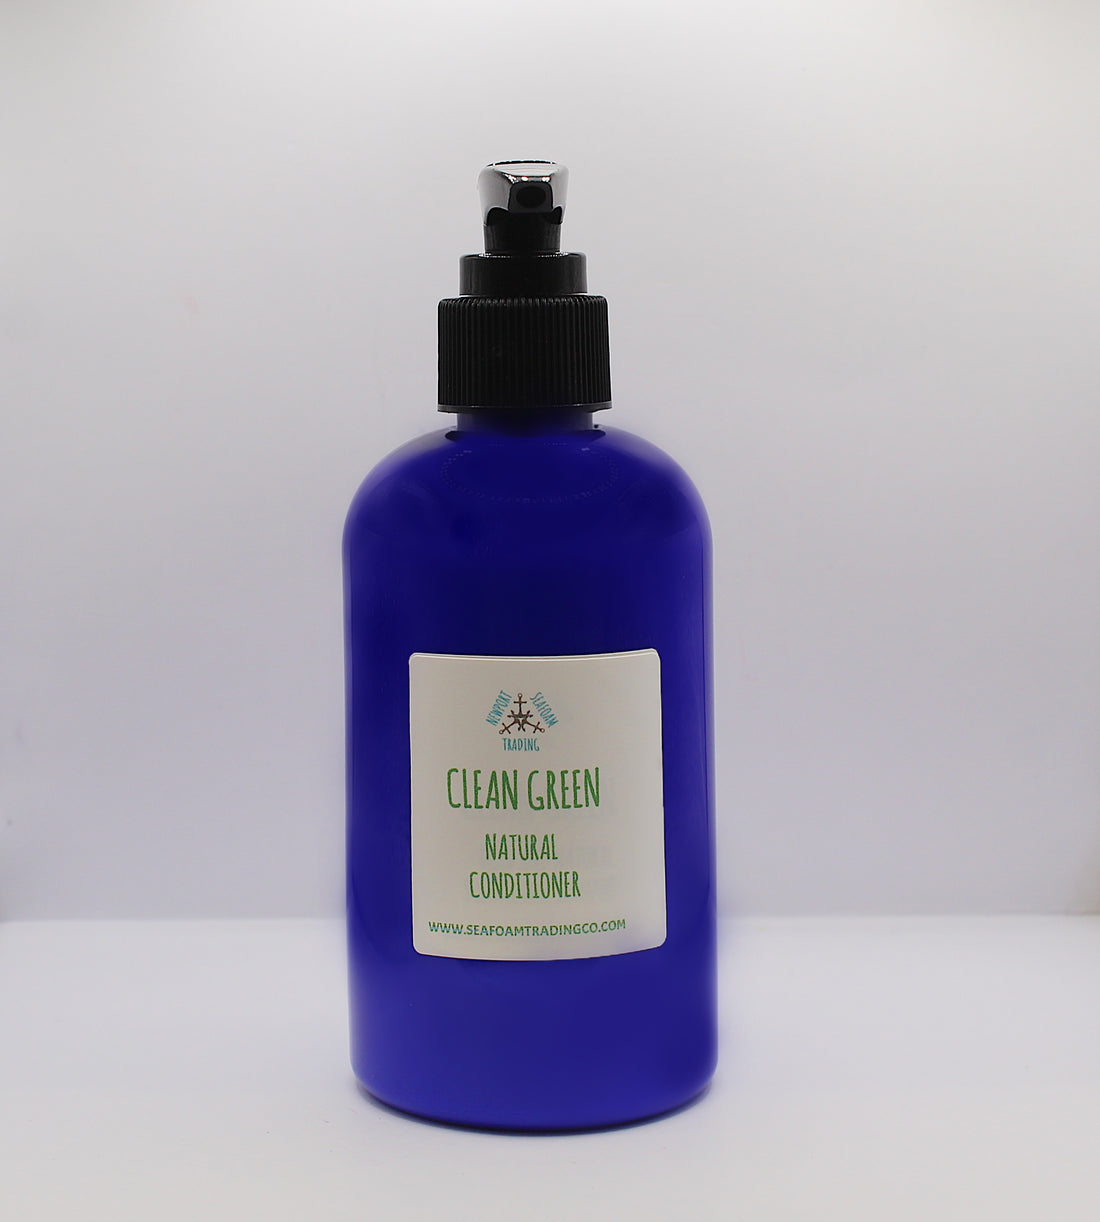 Clean Green Natural Conditioner